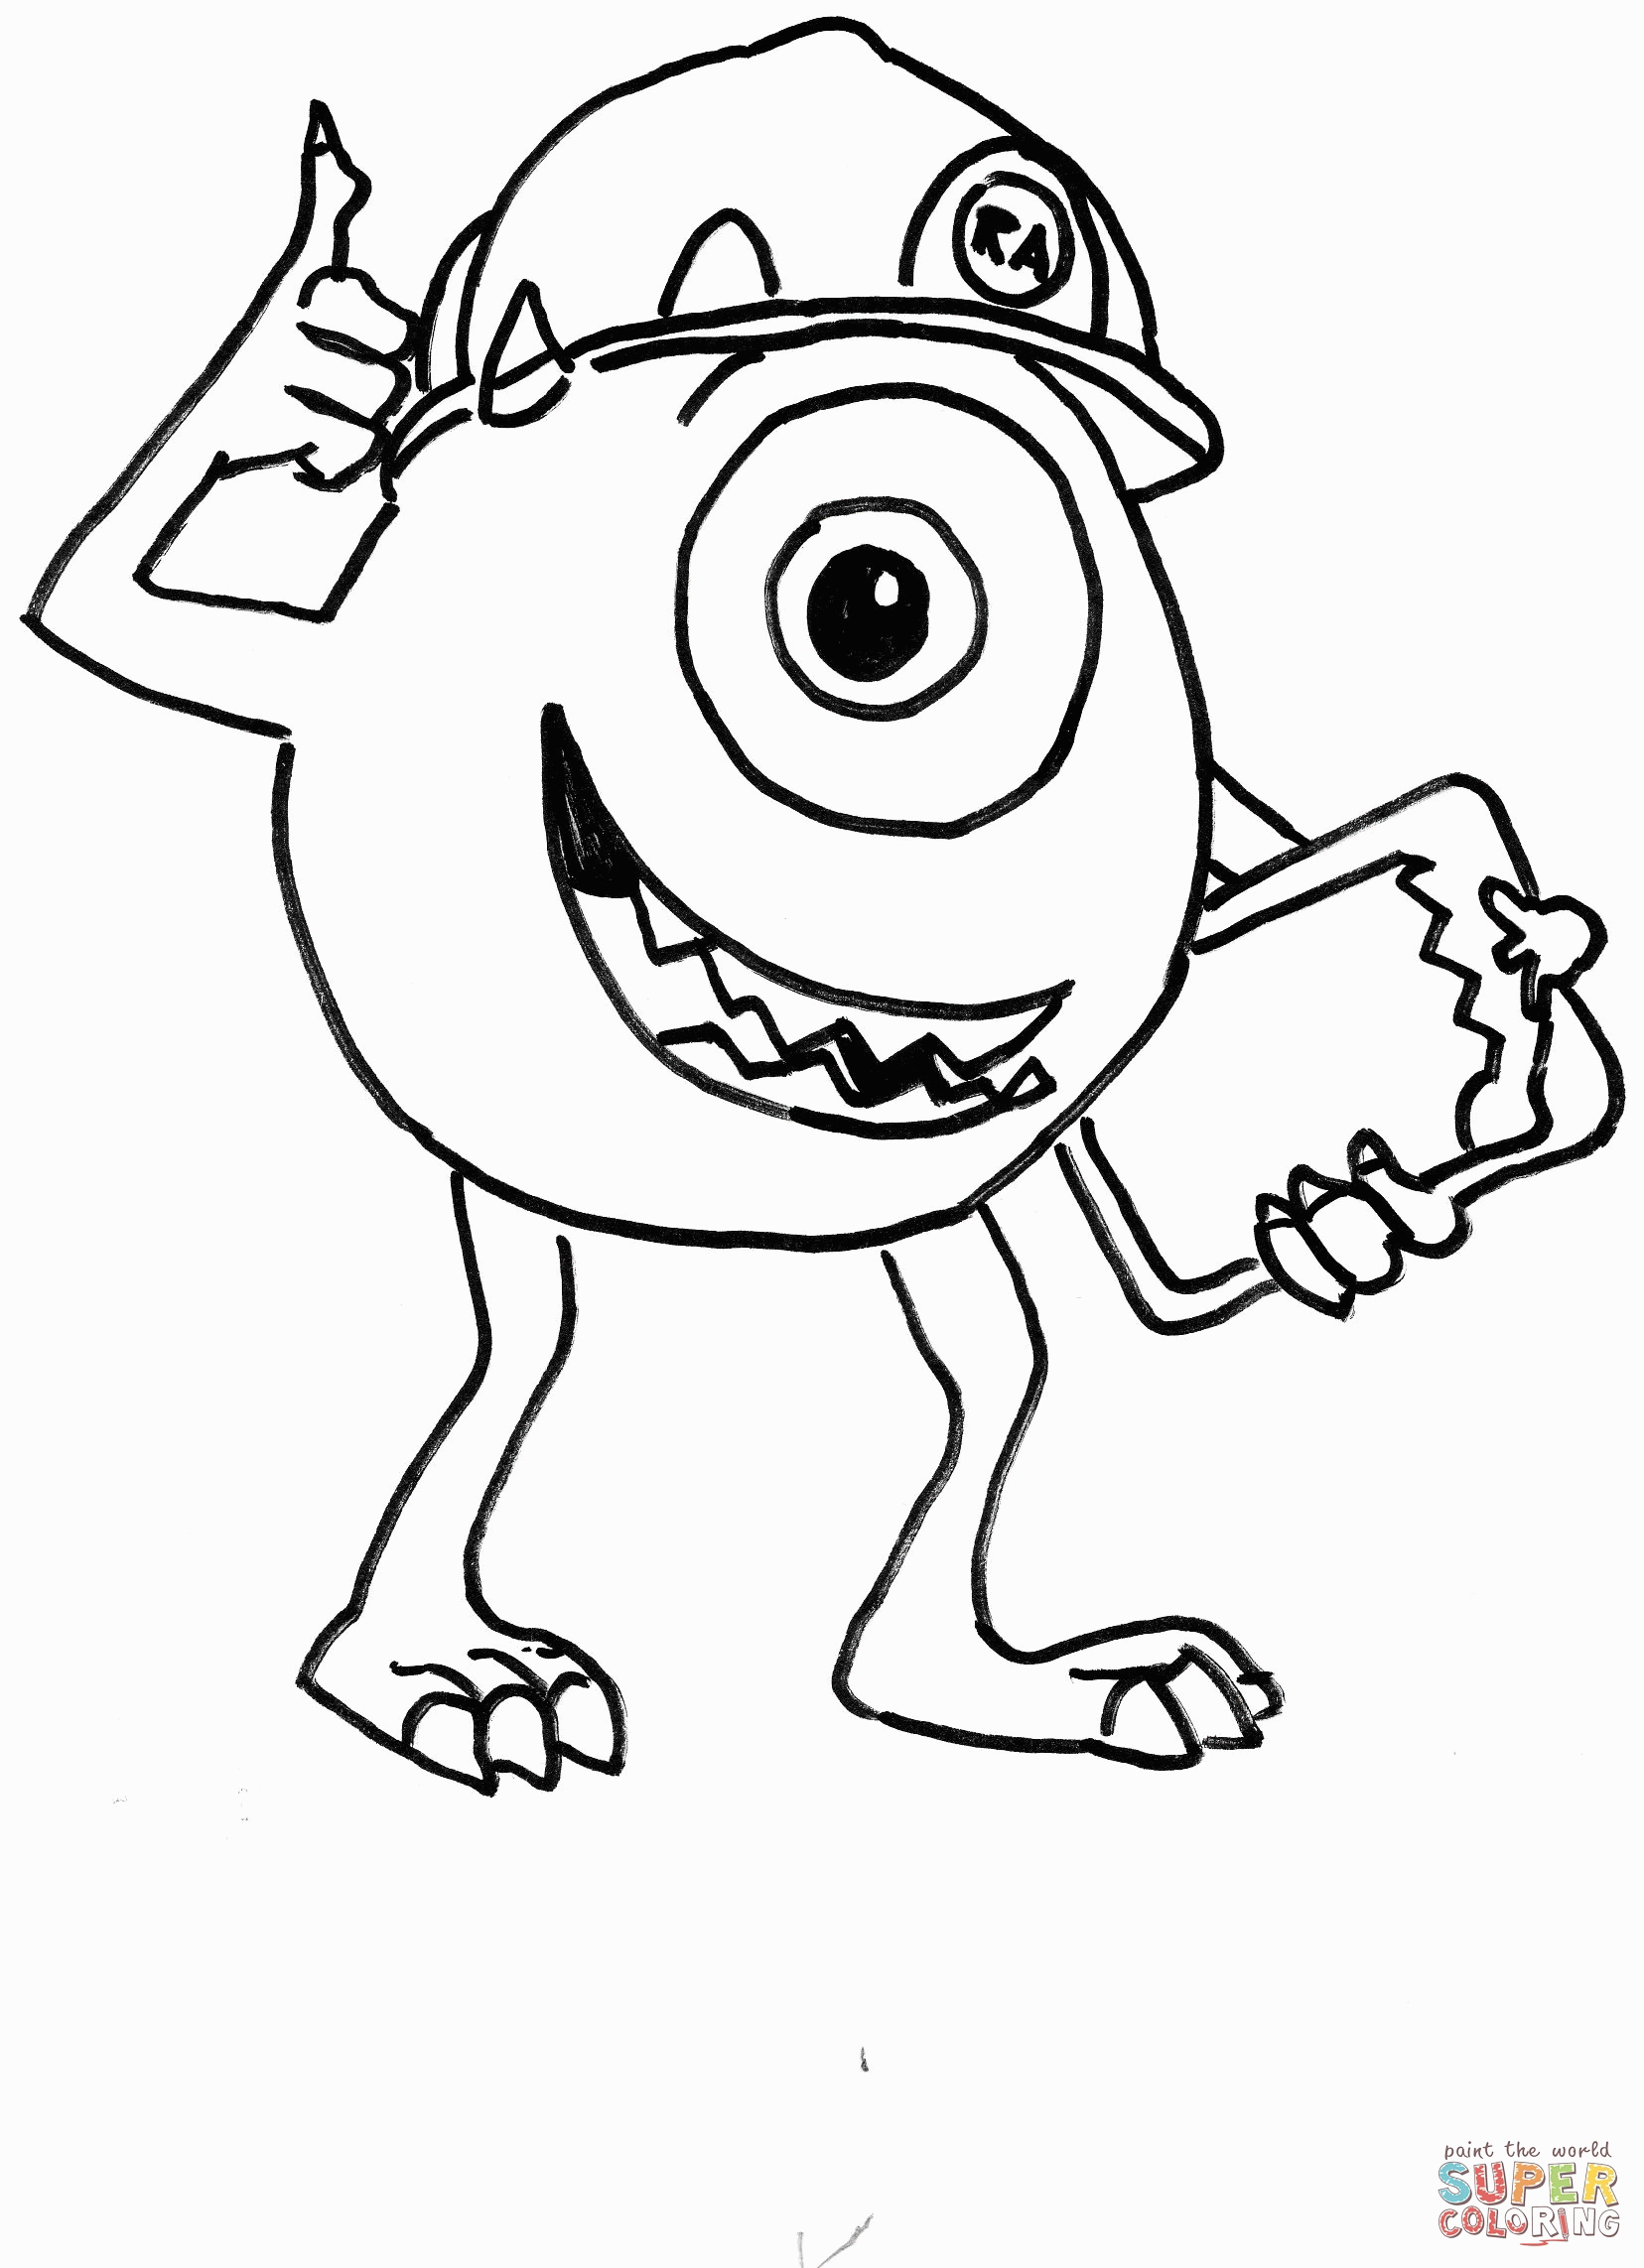 Monster inc. coloring pages | Free Coloring Pages